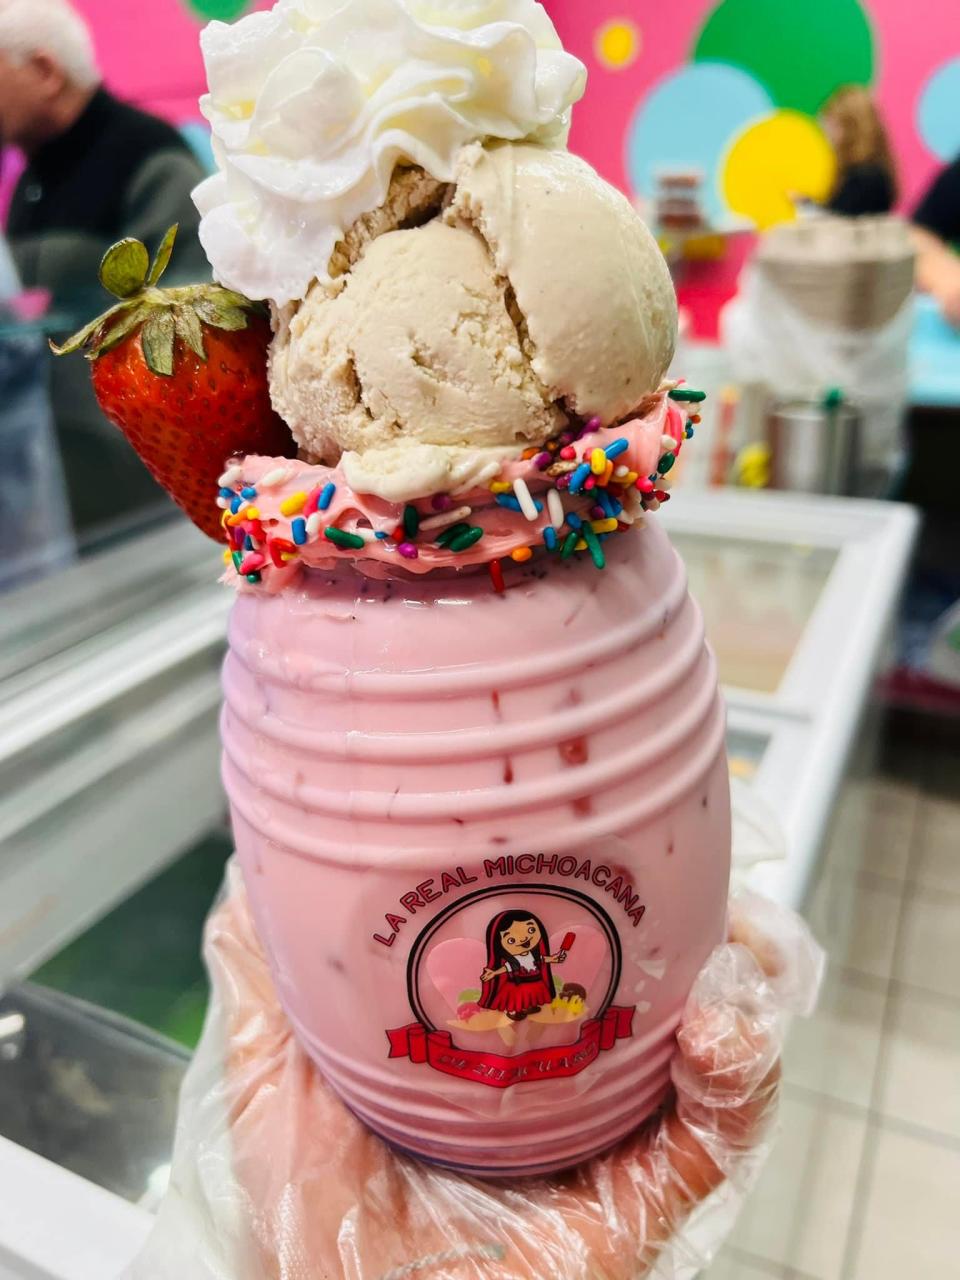 This strawberry ice cream drink is one of the menu items at La Real Michoacana de Zitacuaro, which is opening a location in Sioux Falls. The new shop will be called El Chamoy.